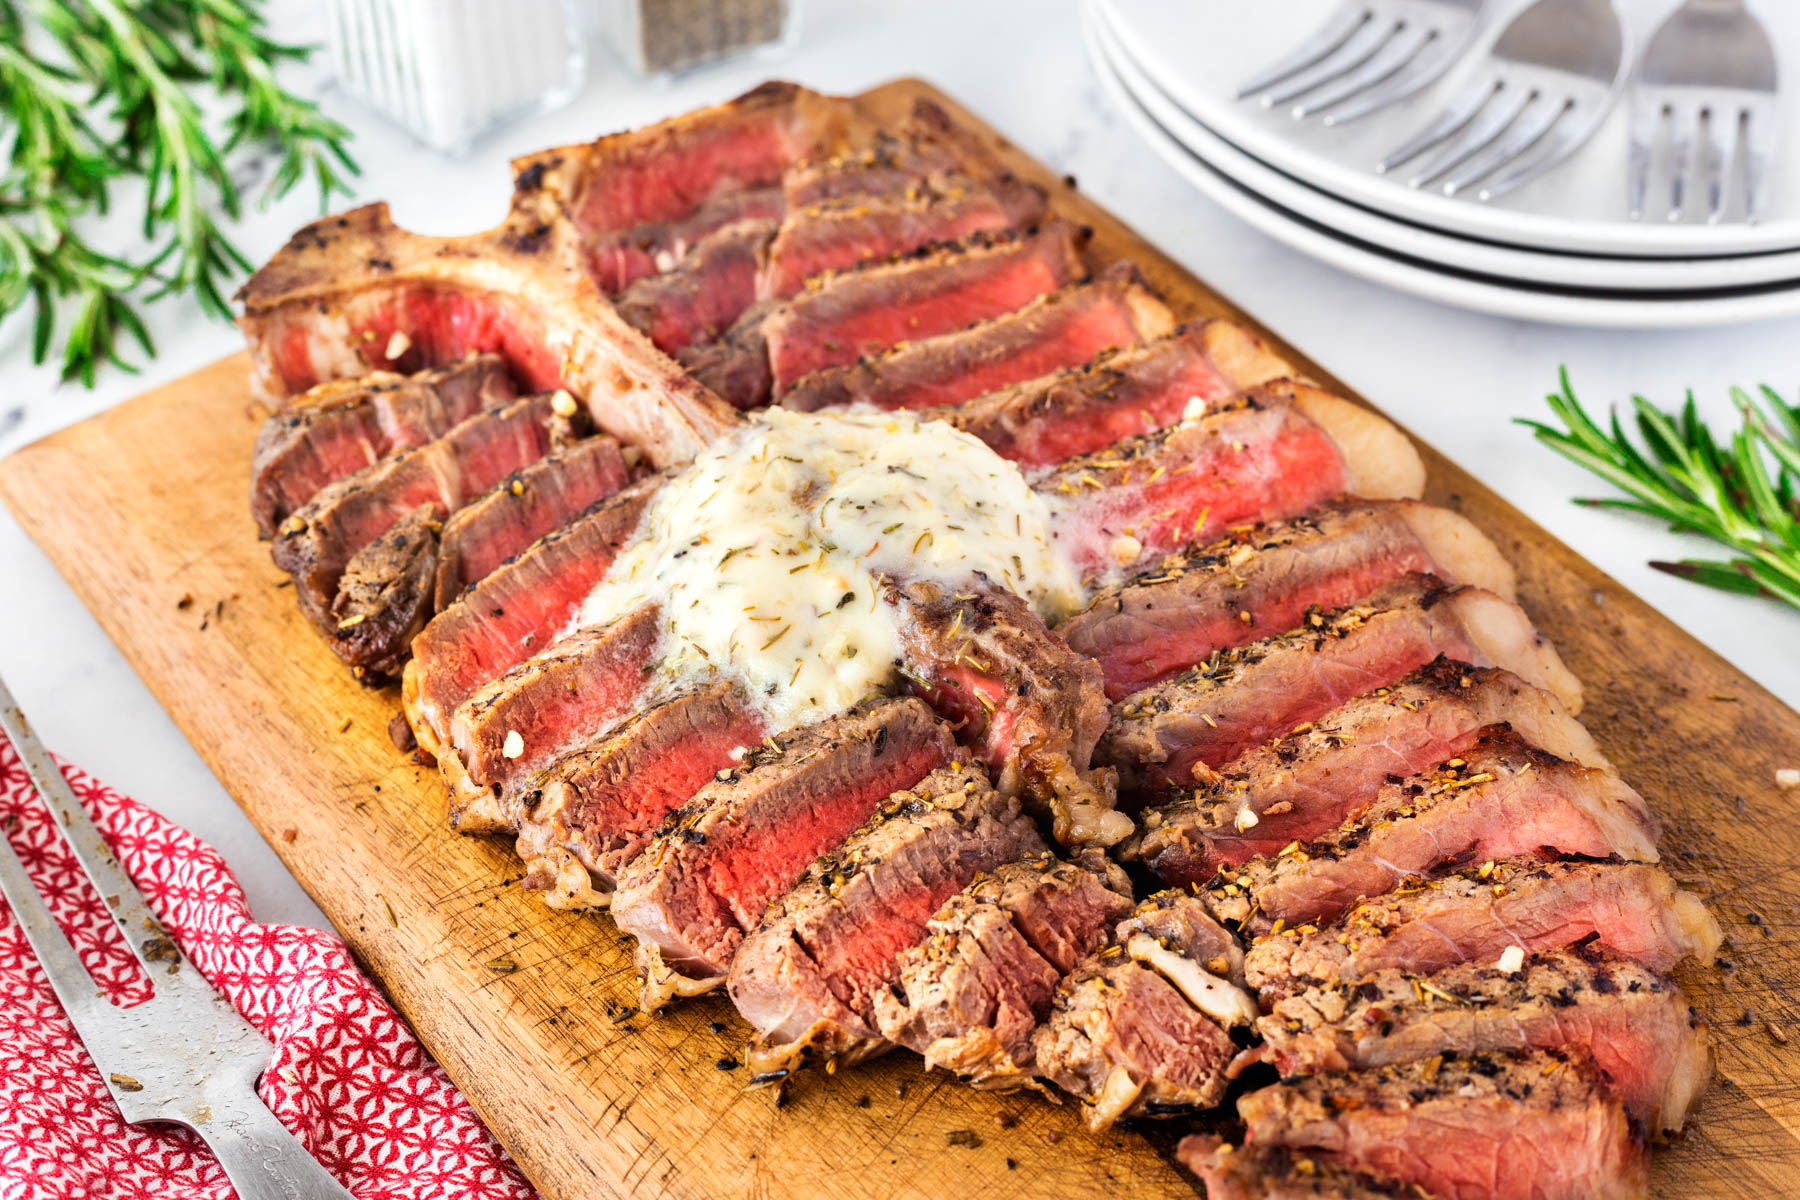 Grilled porterhouse steak sliced on a wooden cutting board and the meat replaced against the T-bone with a dollop of herb garlic butter melting on top.